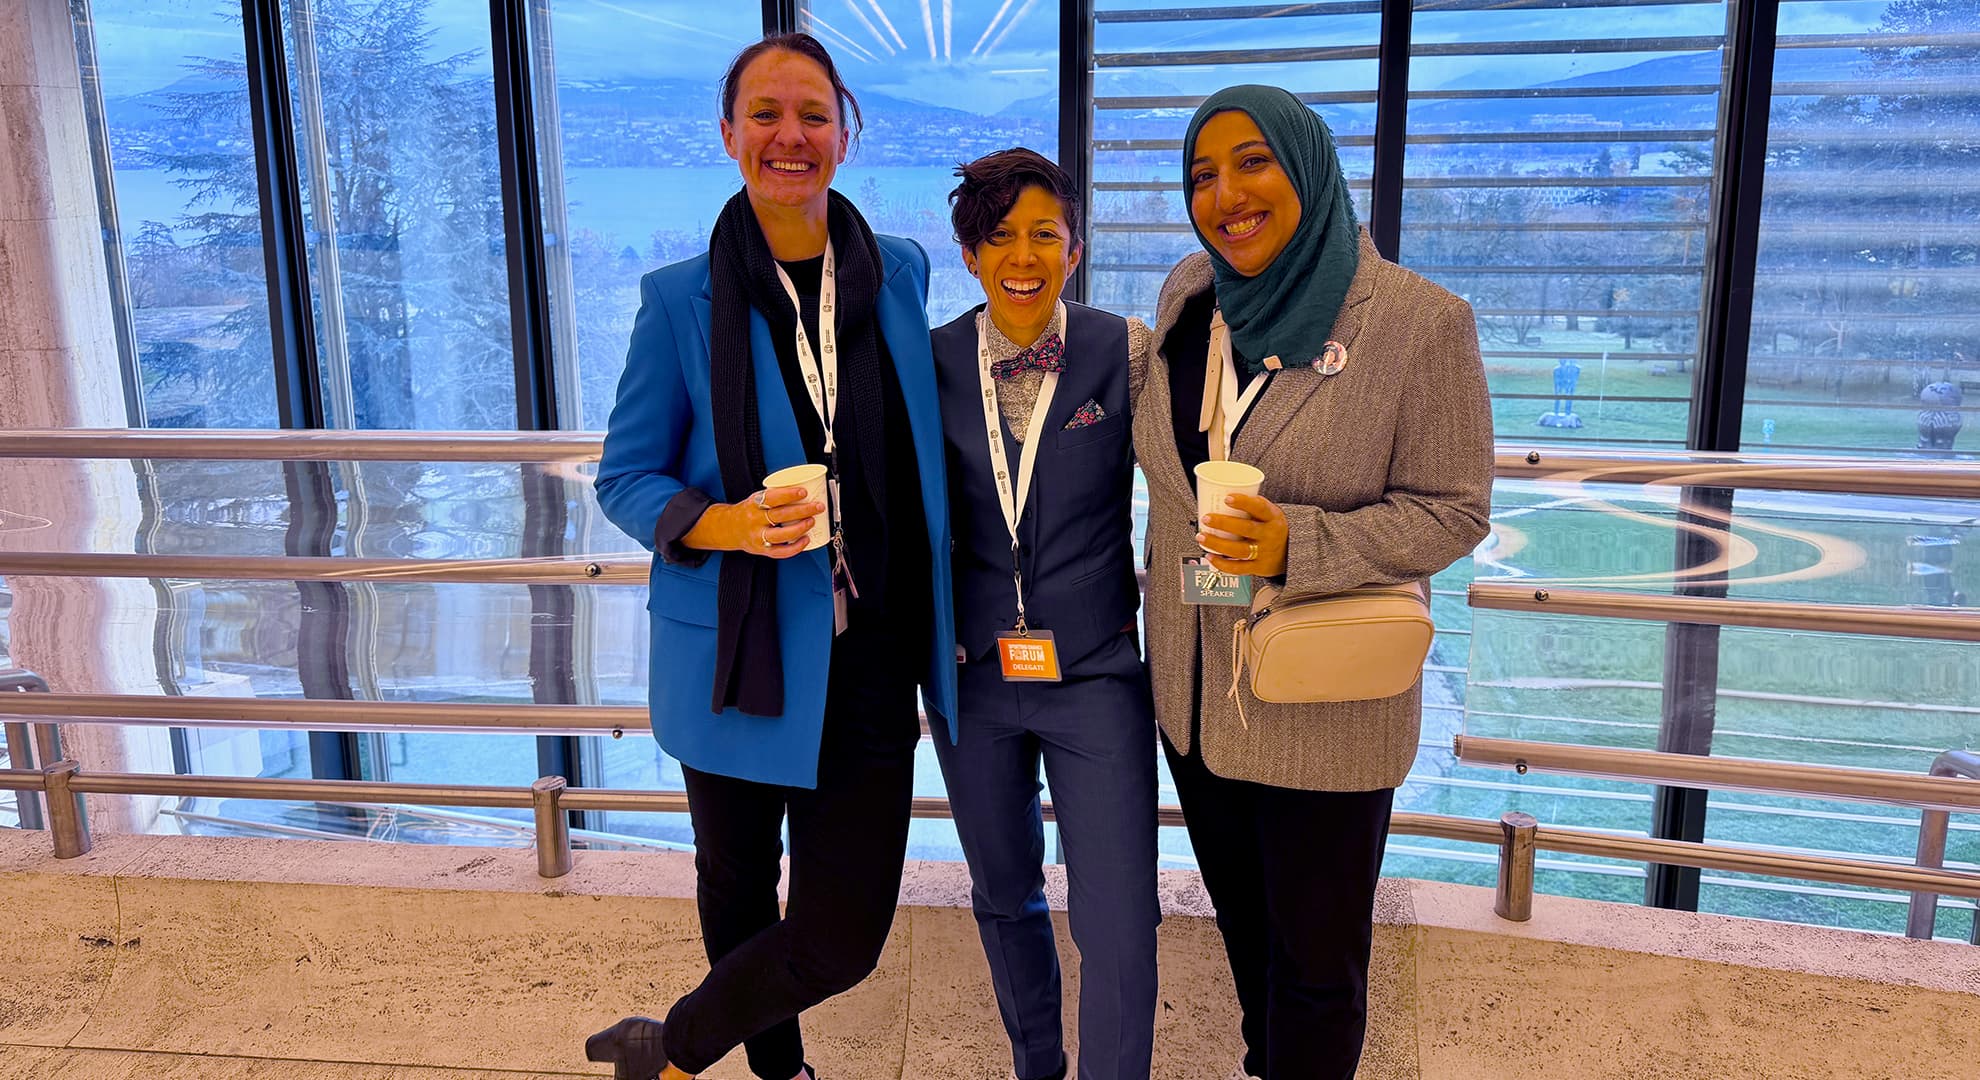 Dr Ashlee Morgan, Professor Sophia Nimphius and Shireen Ahmed pose for a candid photo at the Sporting Chance Forum